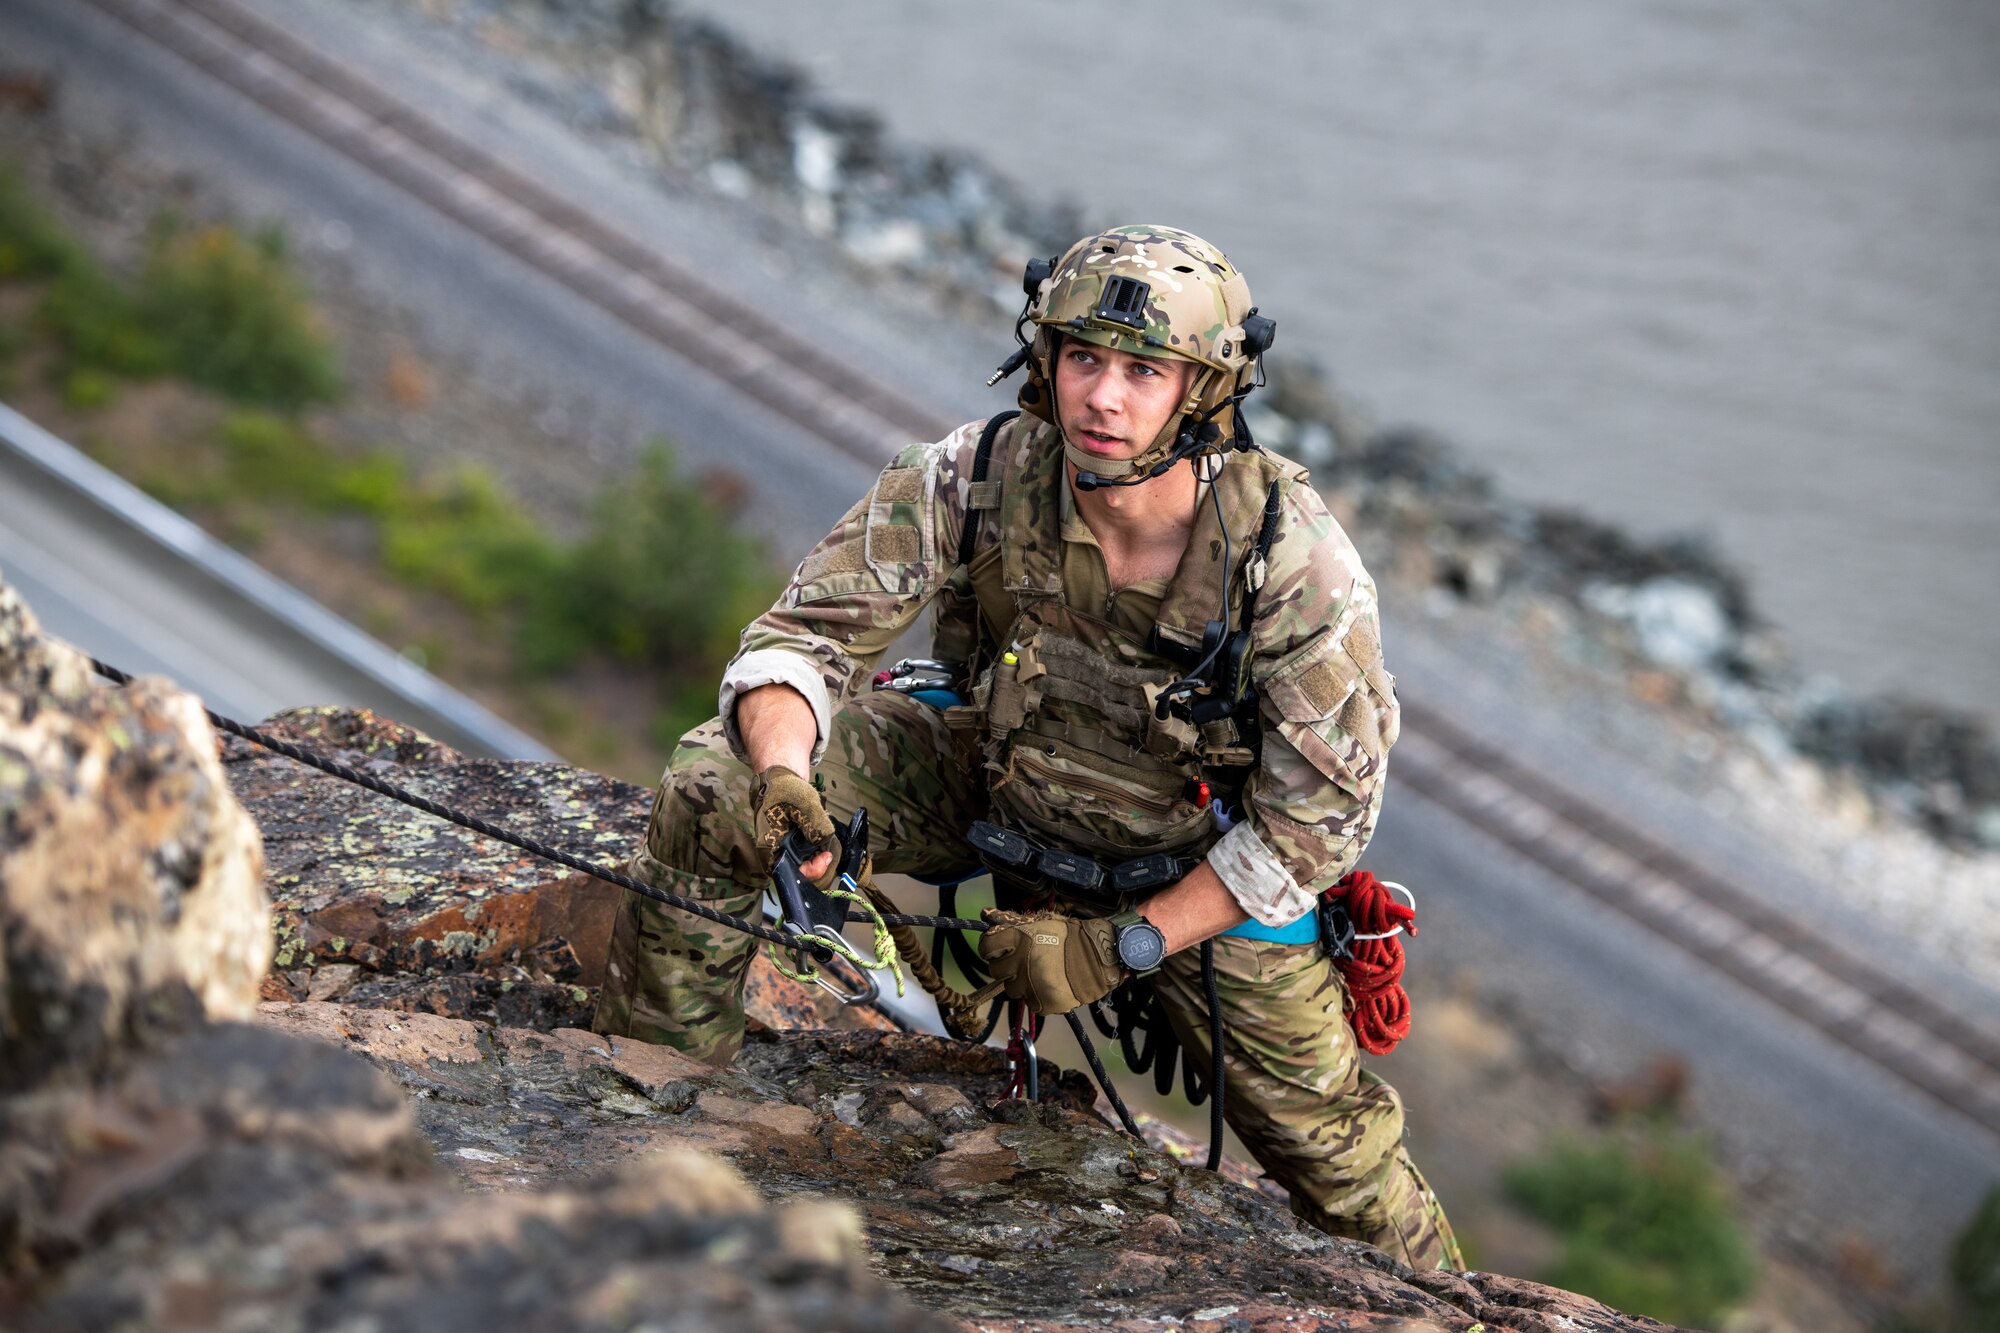 An Airman grips a rope as he hangs off of a cliff face.